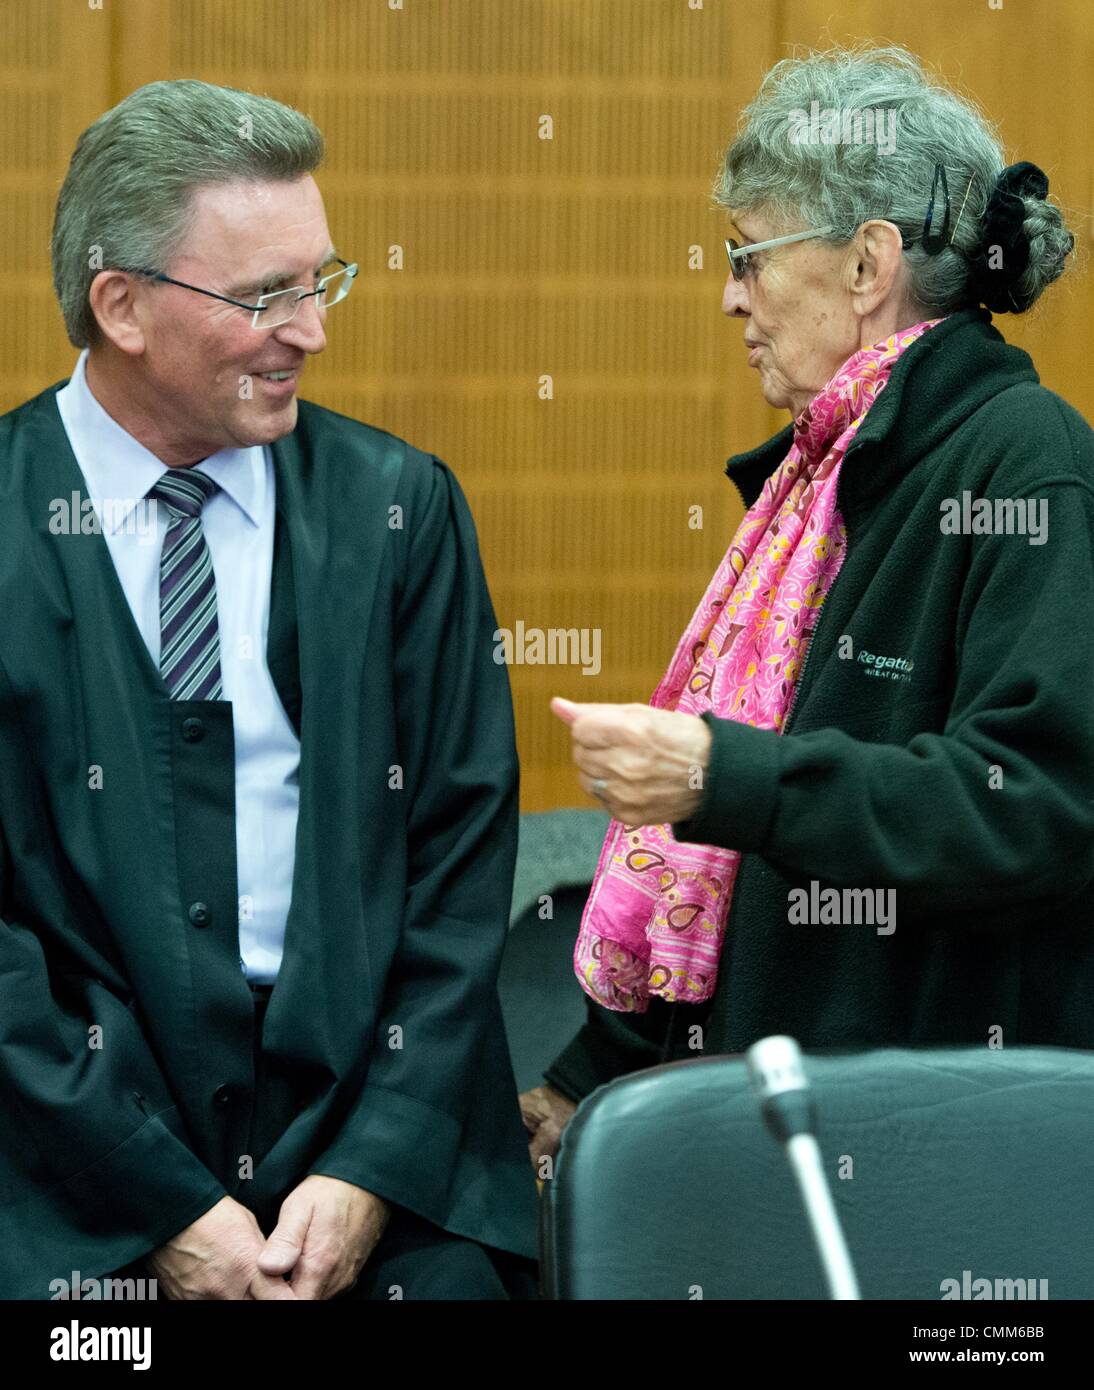 Frankfurt Main, Germany. 05th Nov, 2013. Accused Sonja Suder talks to her lawyer in the high security court room of the district court in Frankfurt Main, Germany, 05 November 2013. Suder stands accused of a possible involvement in a terror attack on the OPEC headquarters in Vienna in 1975. Photo: BORIS ROESSLER/dpa/Alamy Live News Stock Photo